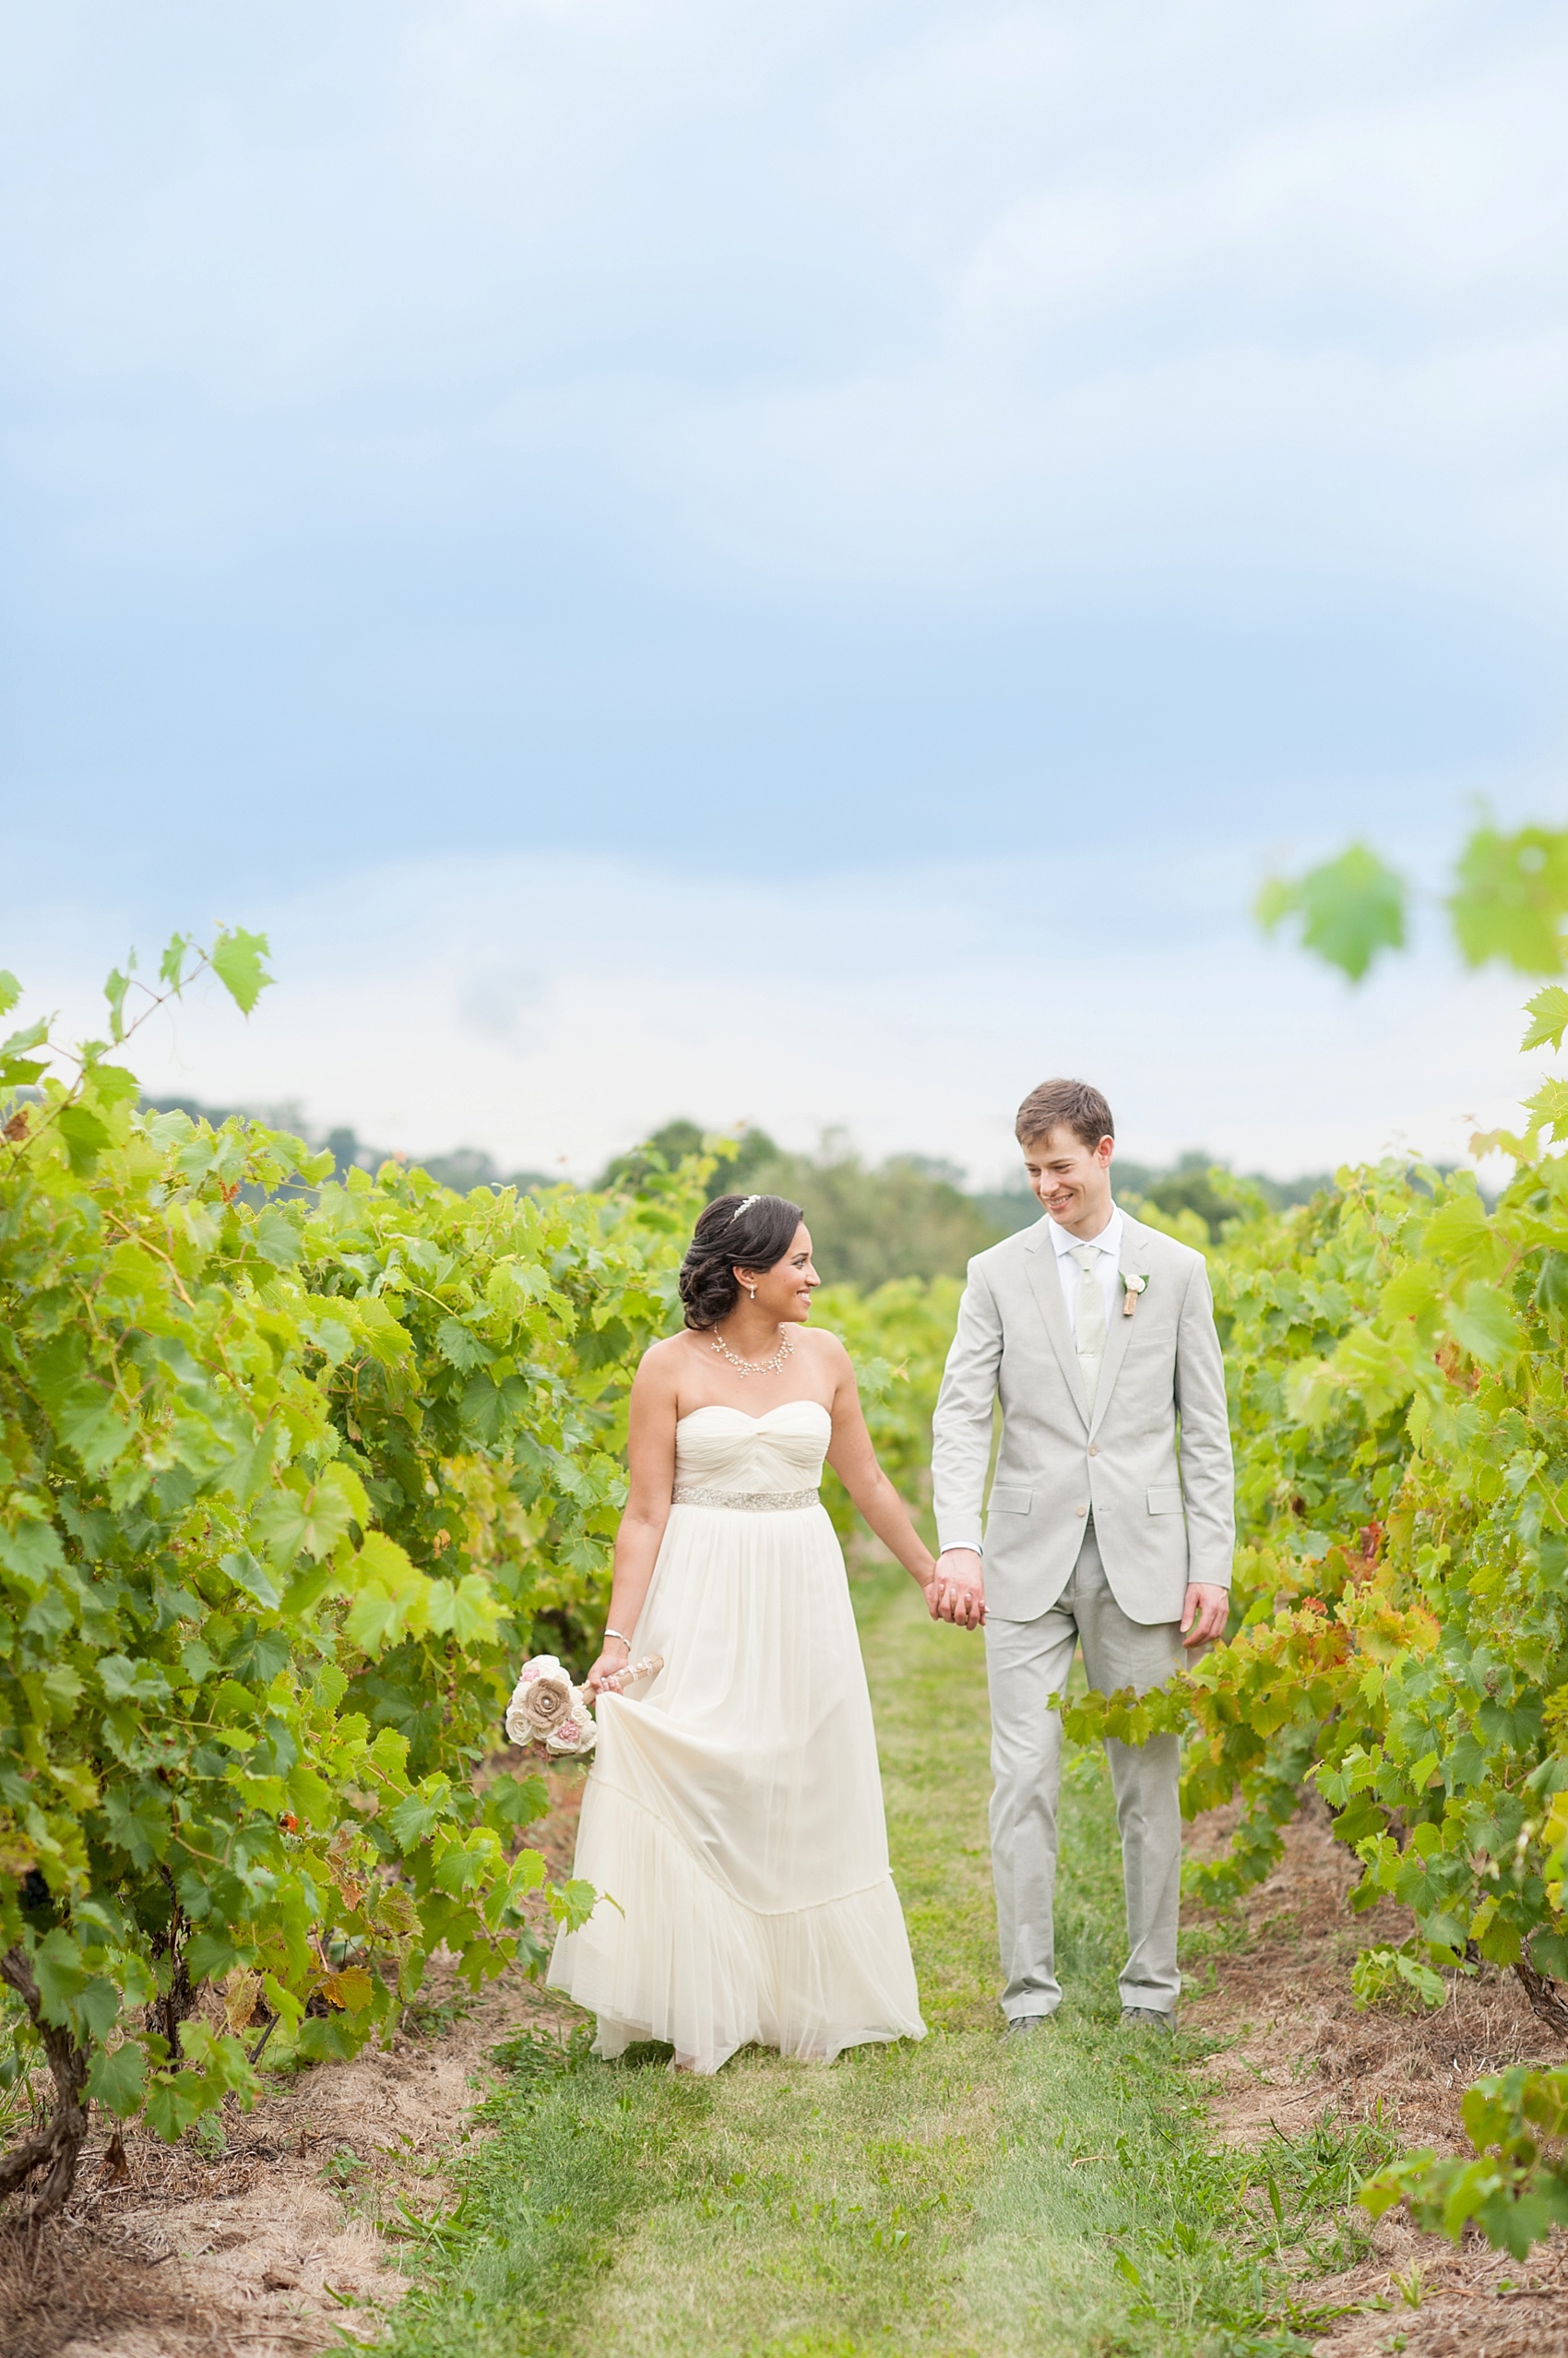 Bride in BHLDN, A Va Et Vien, and groom in J. Crew for a summer vineyard wedding at Hopewell Valley Vineyards. Photos by New Jersey wedding photographer, Mikkel Paige Photography.